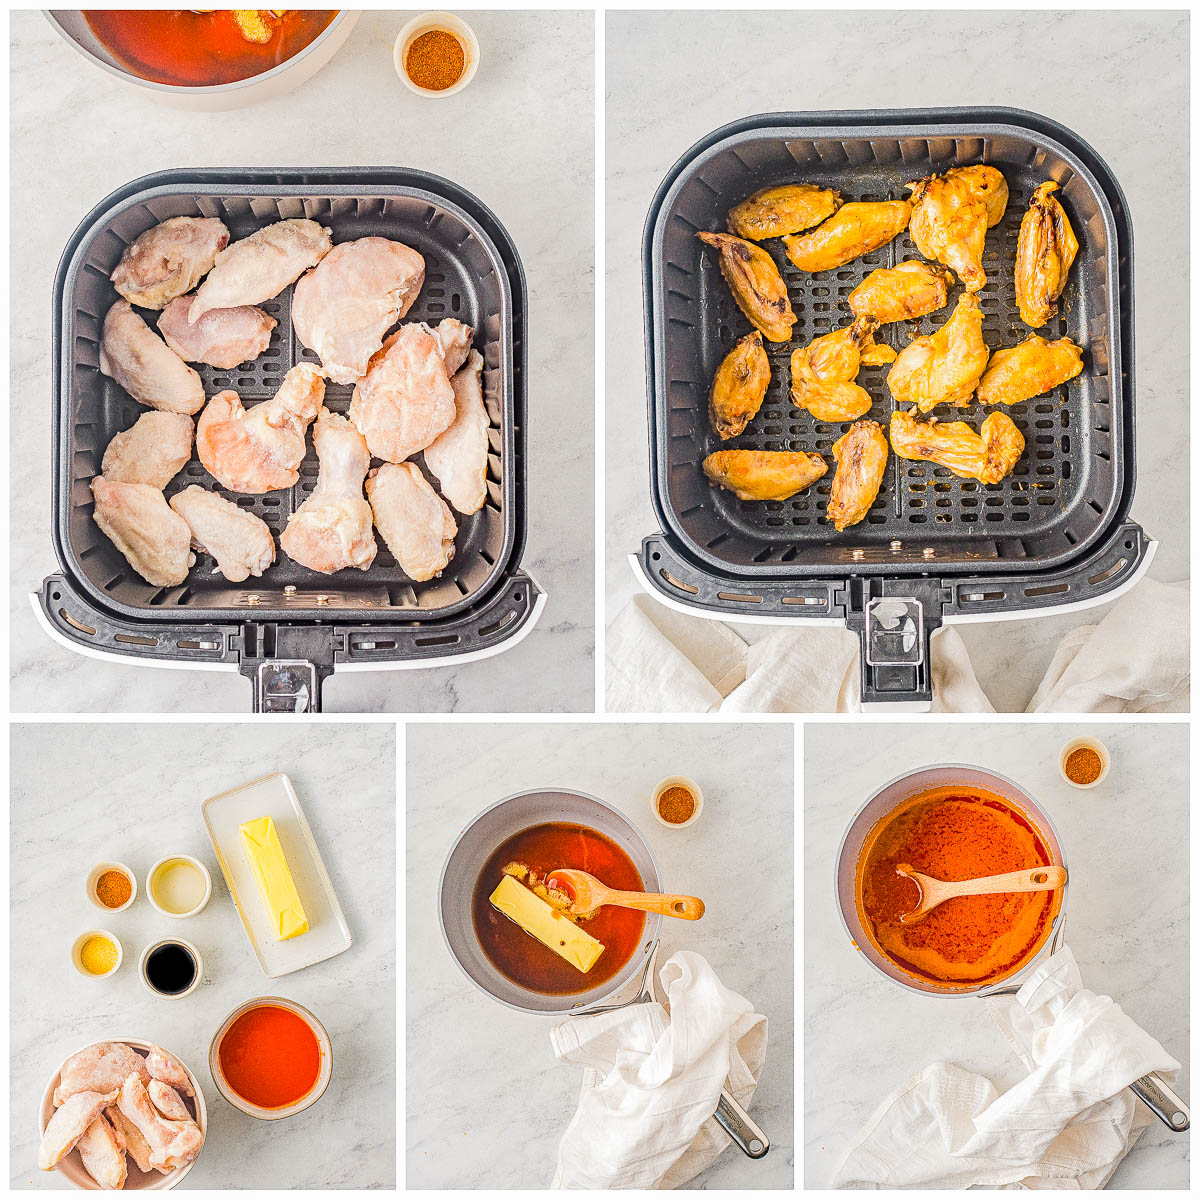 Crispy Air Fryer Chicken Wings with Buffalo Sauce - You don't have to fry chicken wings to get them extra crispy, juicy, and finger-licking good thanks to the tangy buffalo sauce! FAST, EASY, and everyone LOVES these air fried crispy chicken wings! Oven baking instructions also provided.